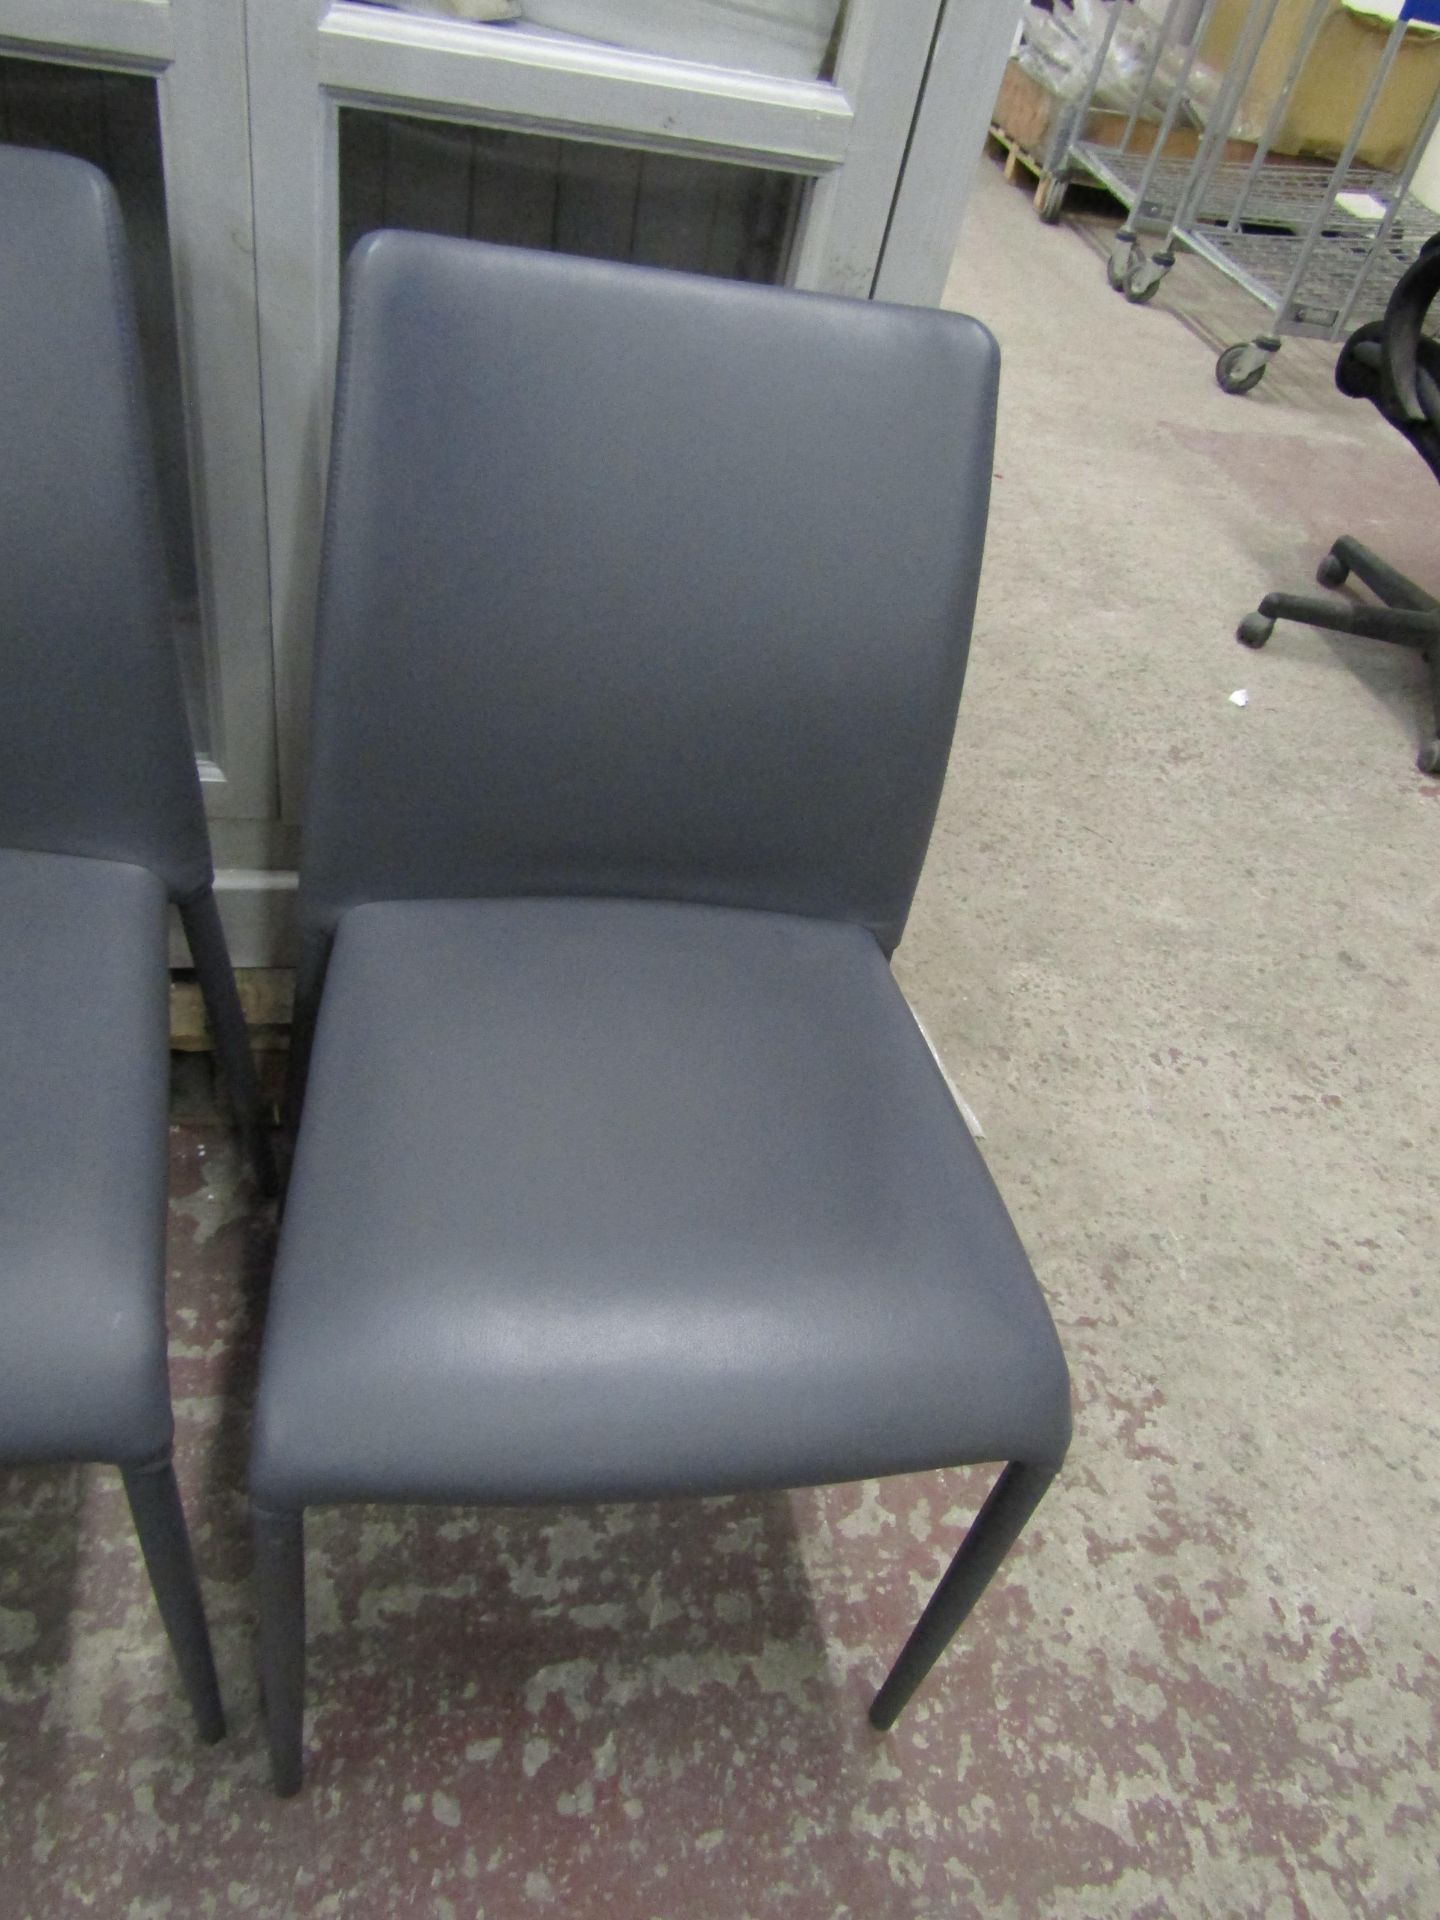 Set of 6 Dwell Svelte Dining chairs, in good condition, may have some minor marks but nothing major, - Image 5 of 9